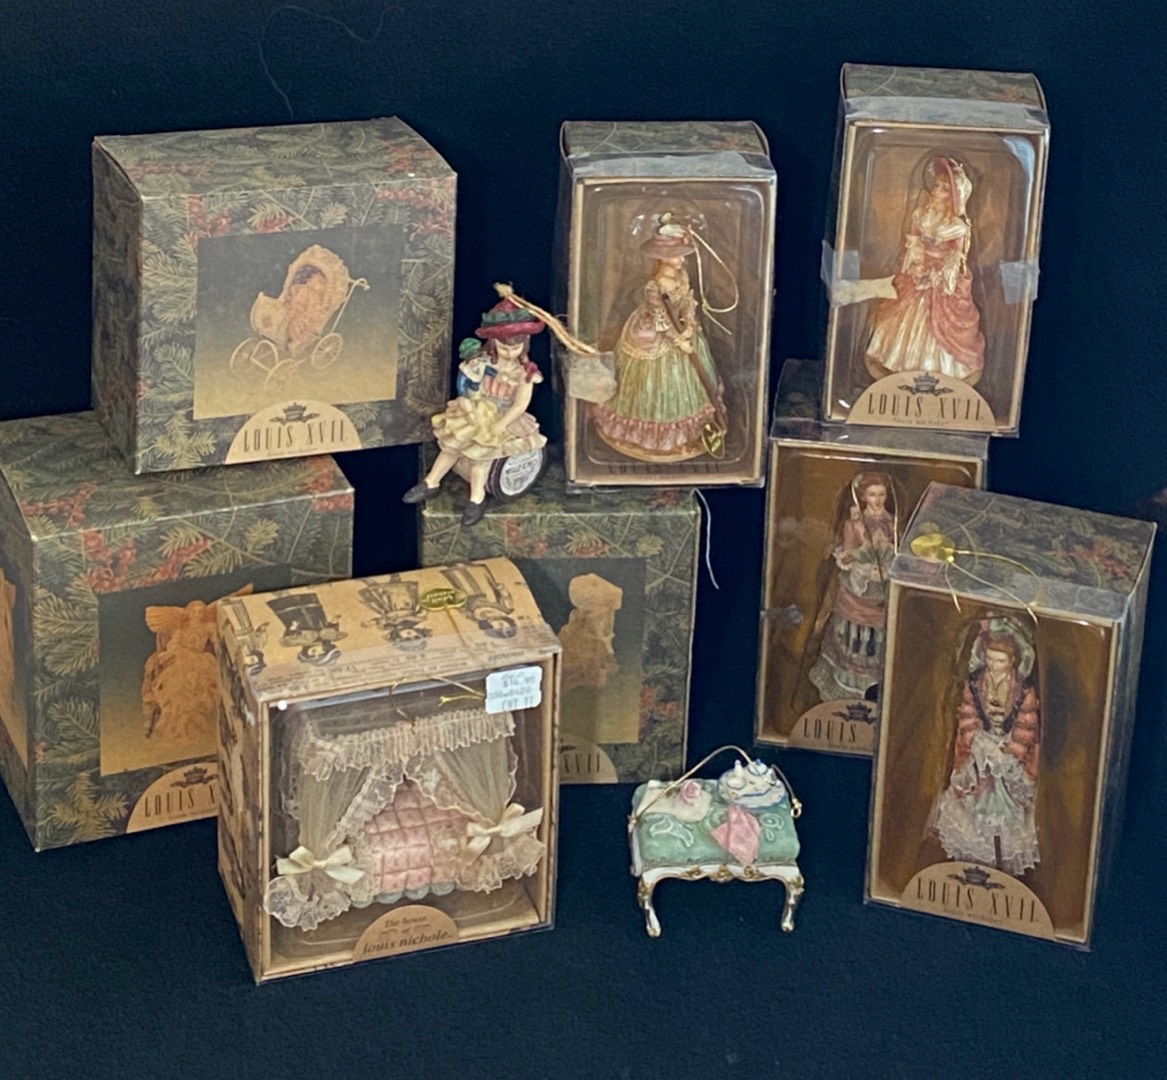 Sold at Auction: A doll house set marked Nicole's